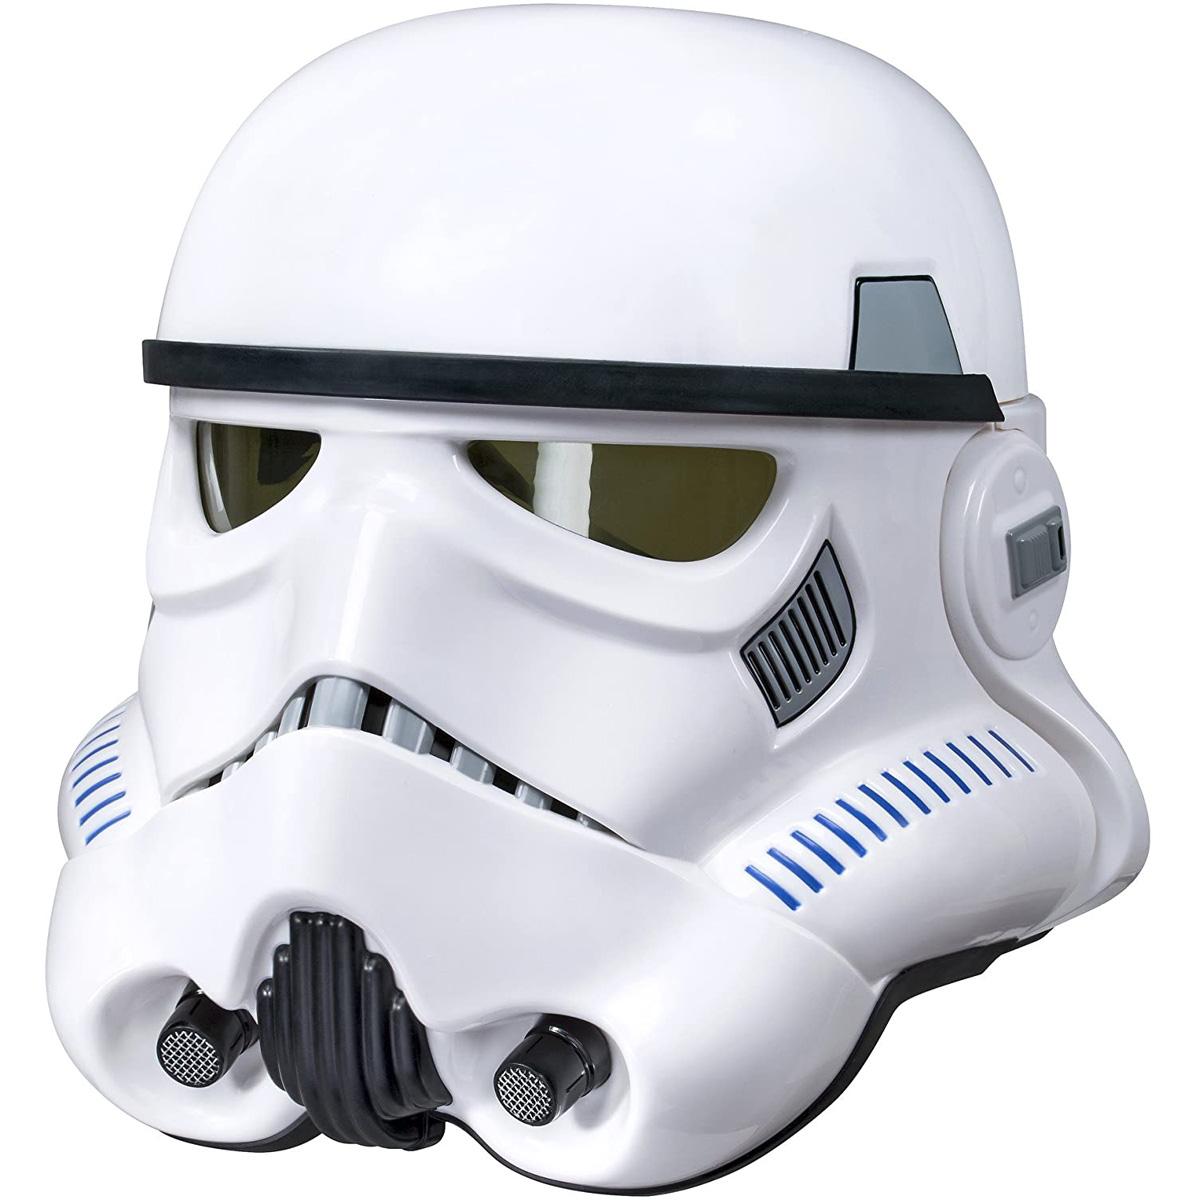 Star Wars The Black Series Rogue One Voice Changer Helmet for $79.99 Shipped